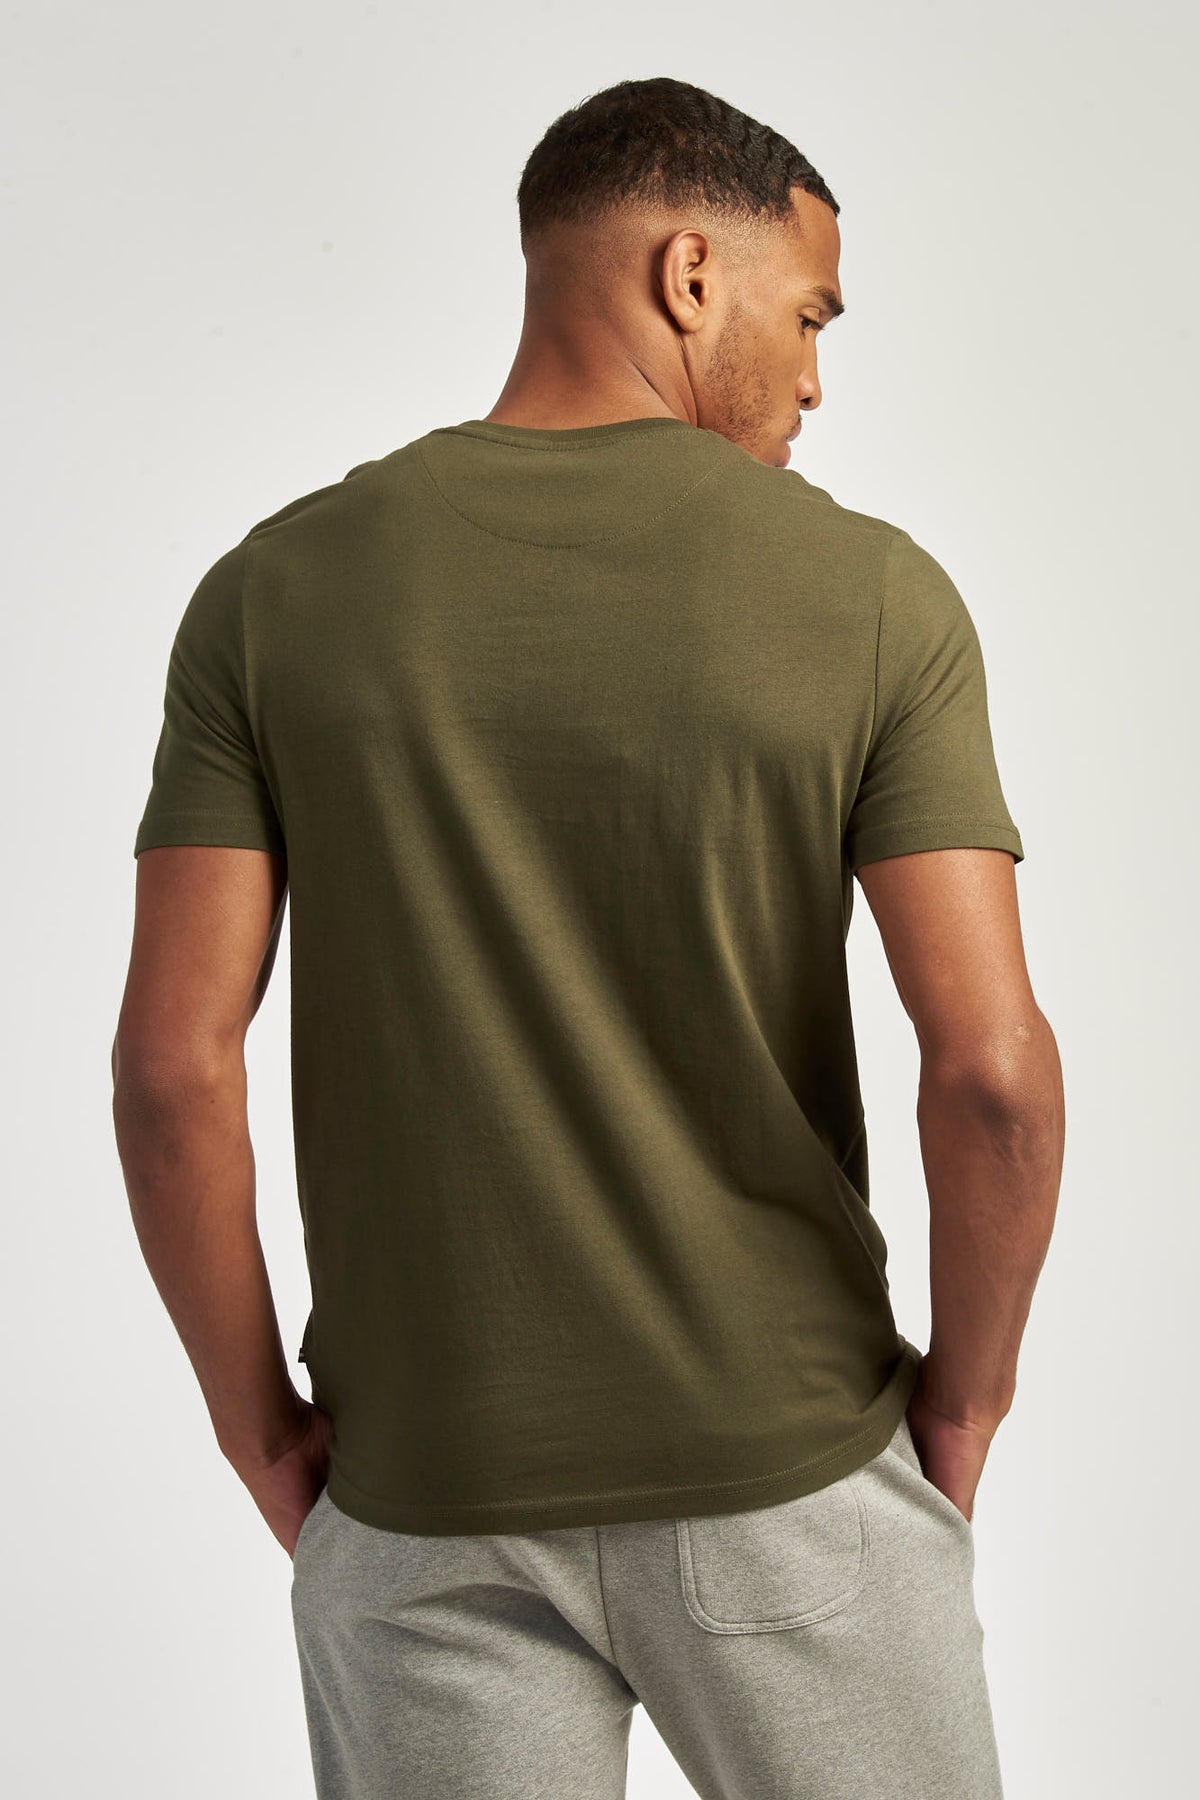 Mens Classic T-Shirt in Army Green